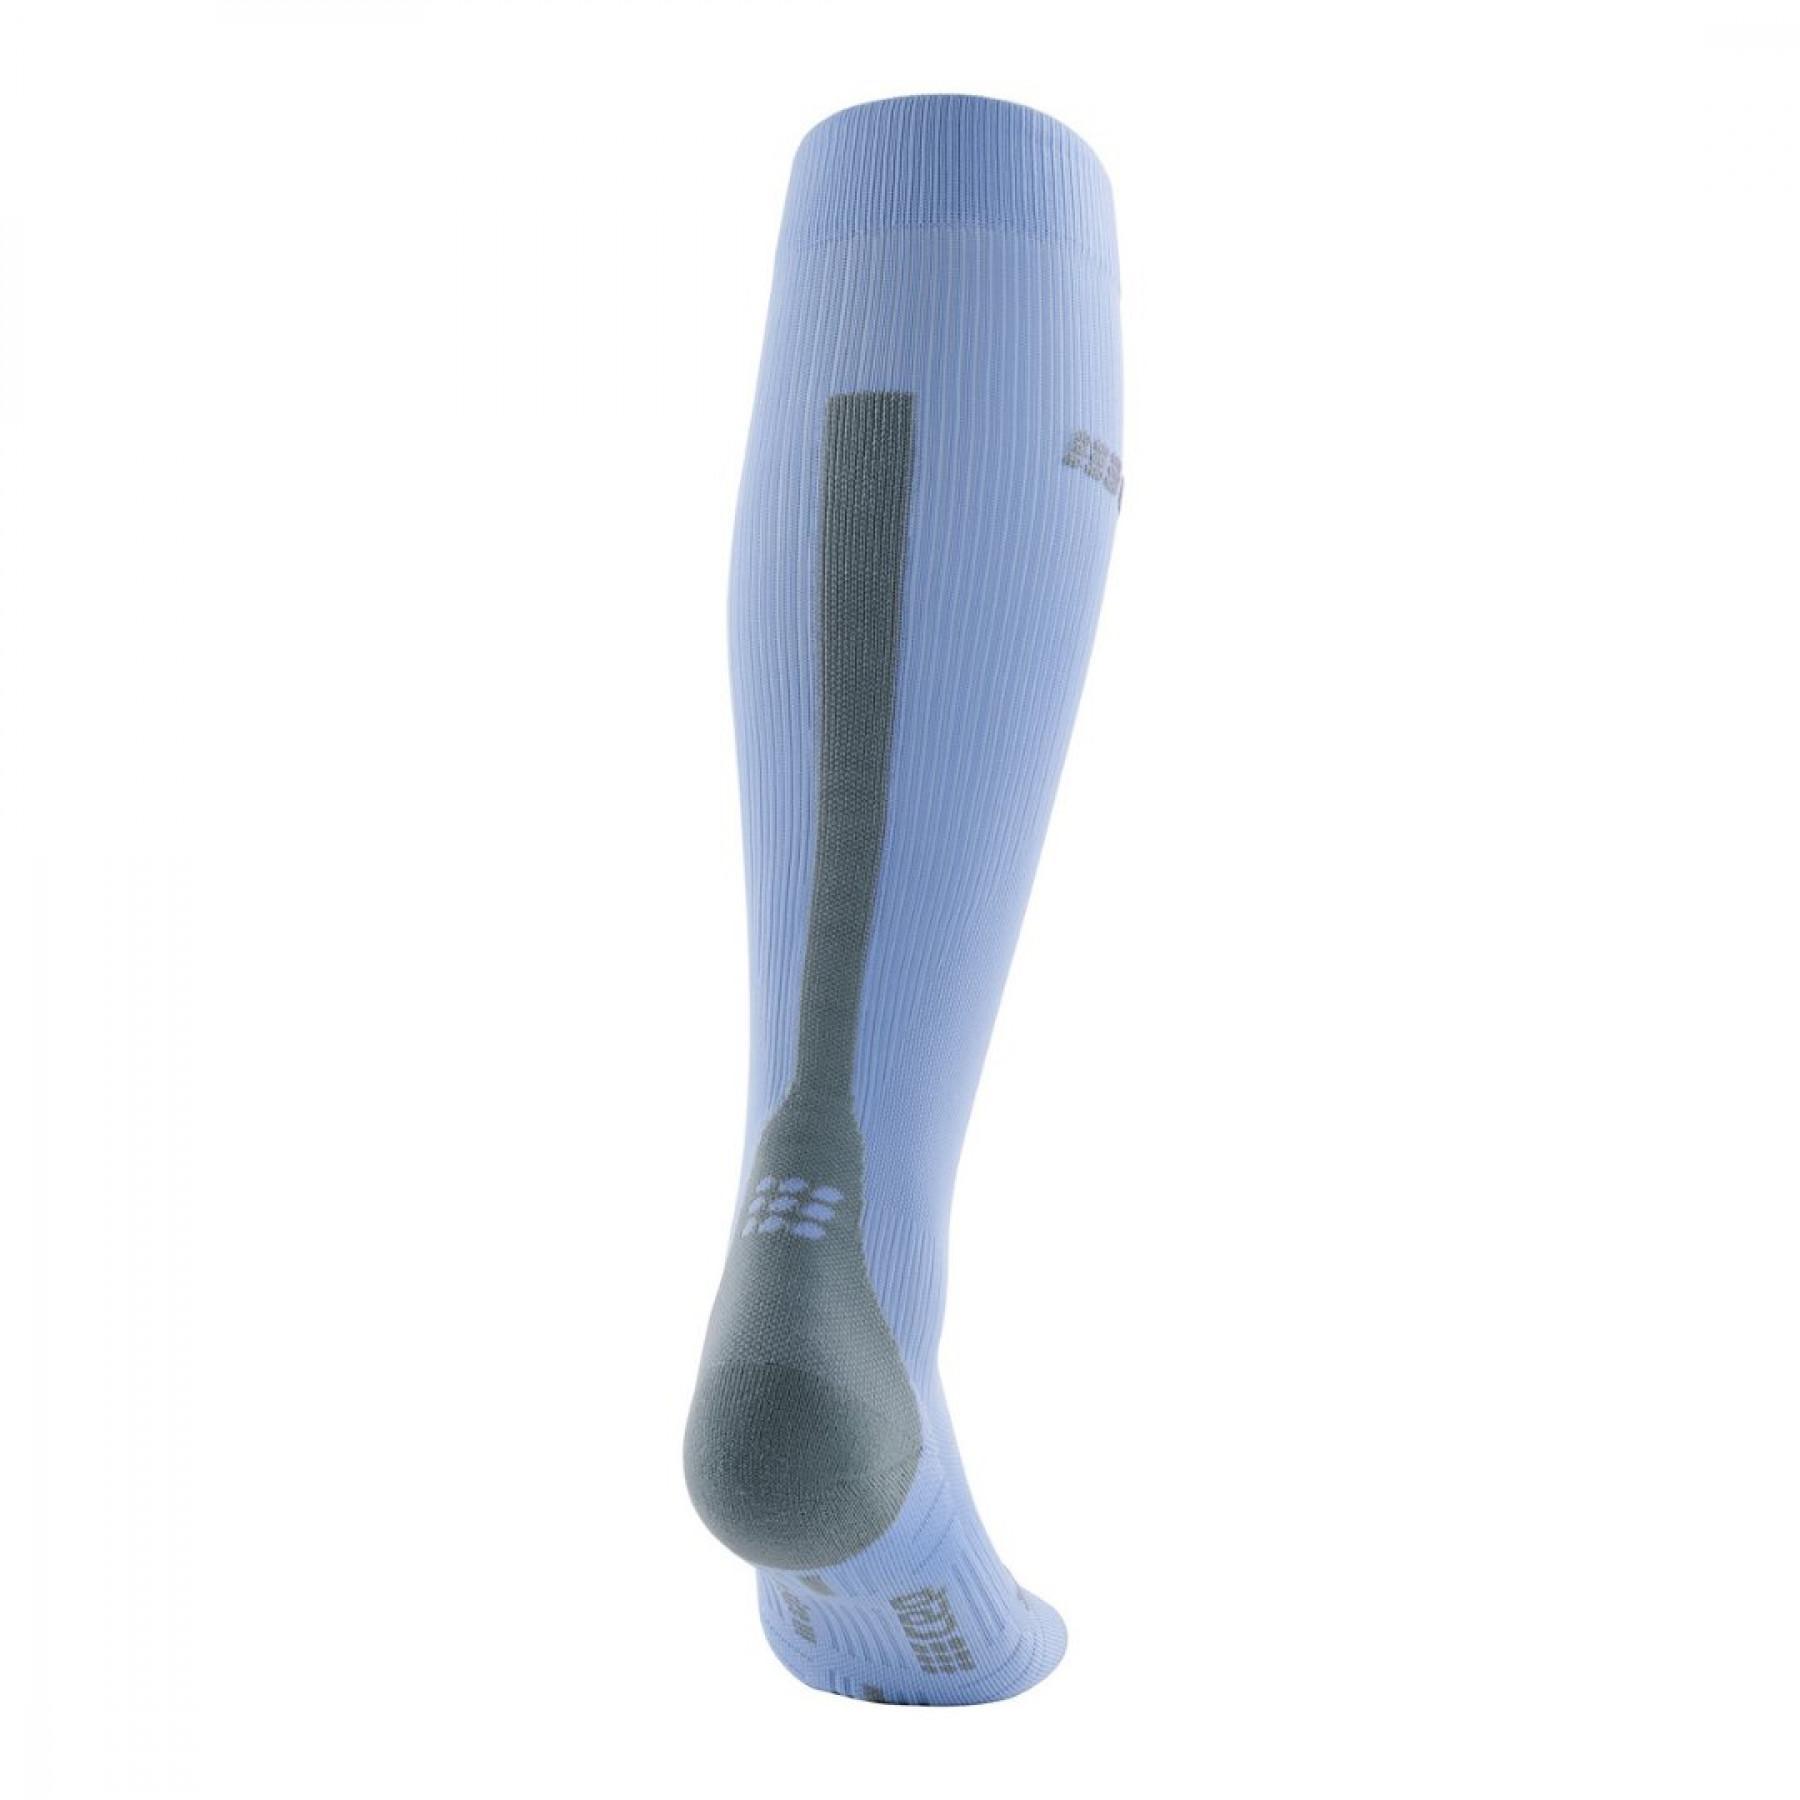 Women's high recovery socks CEP compression 3.0